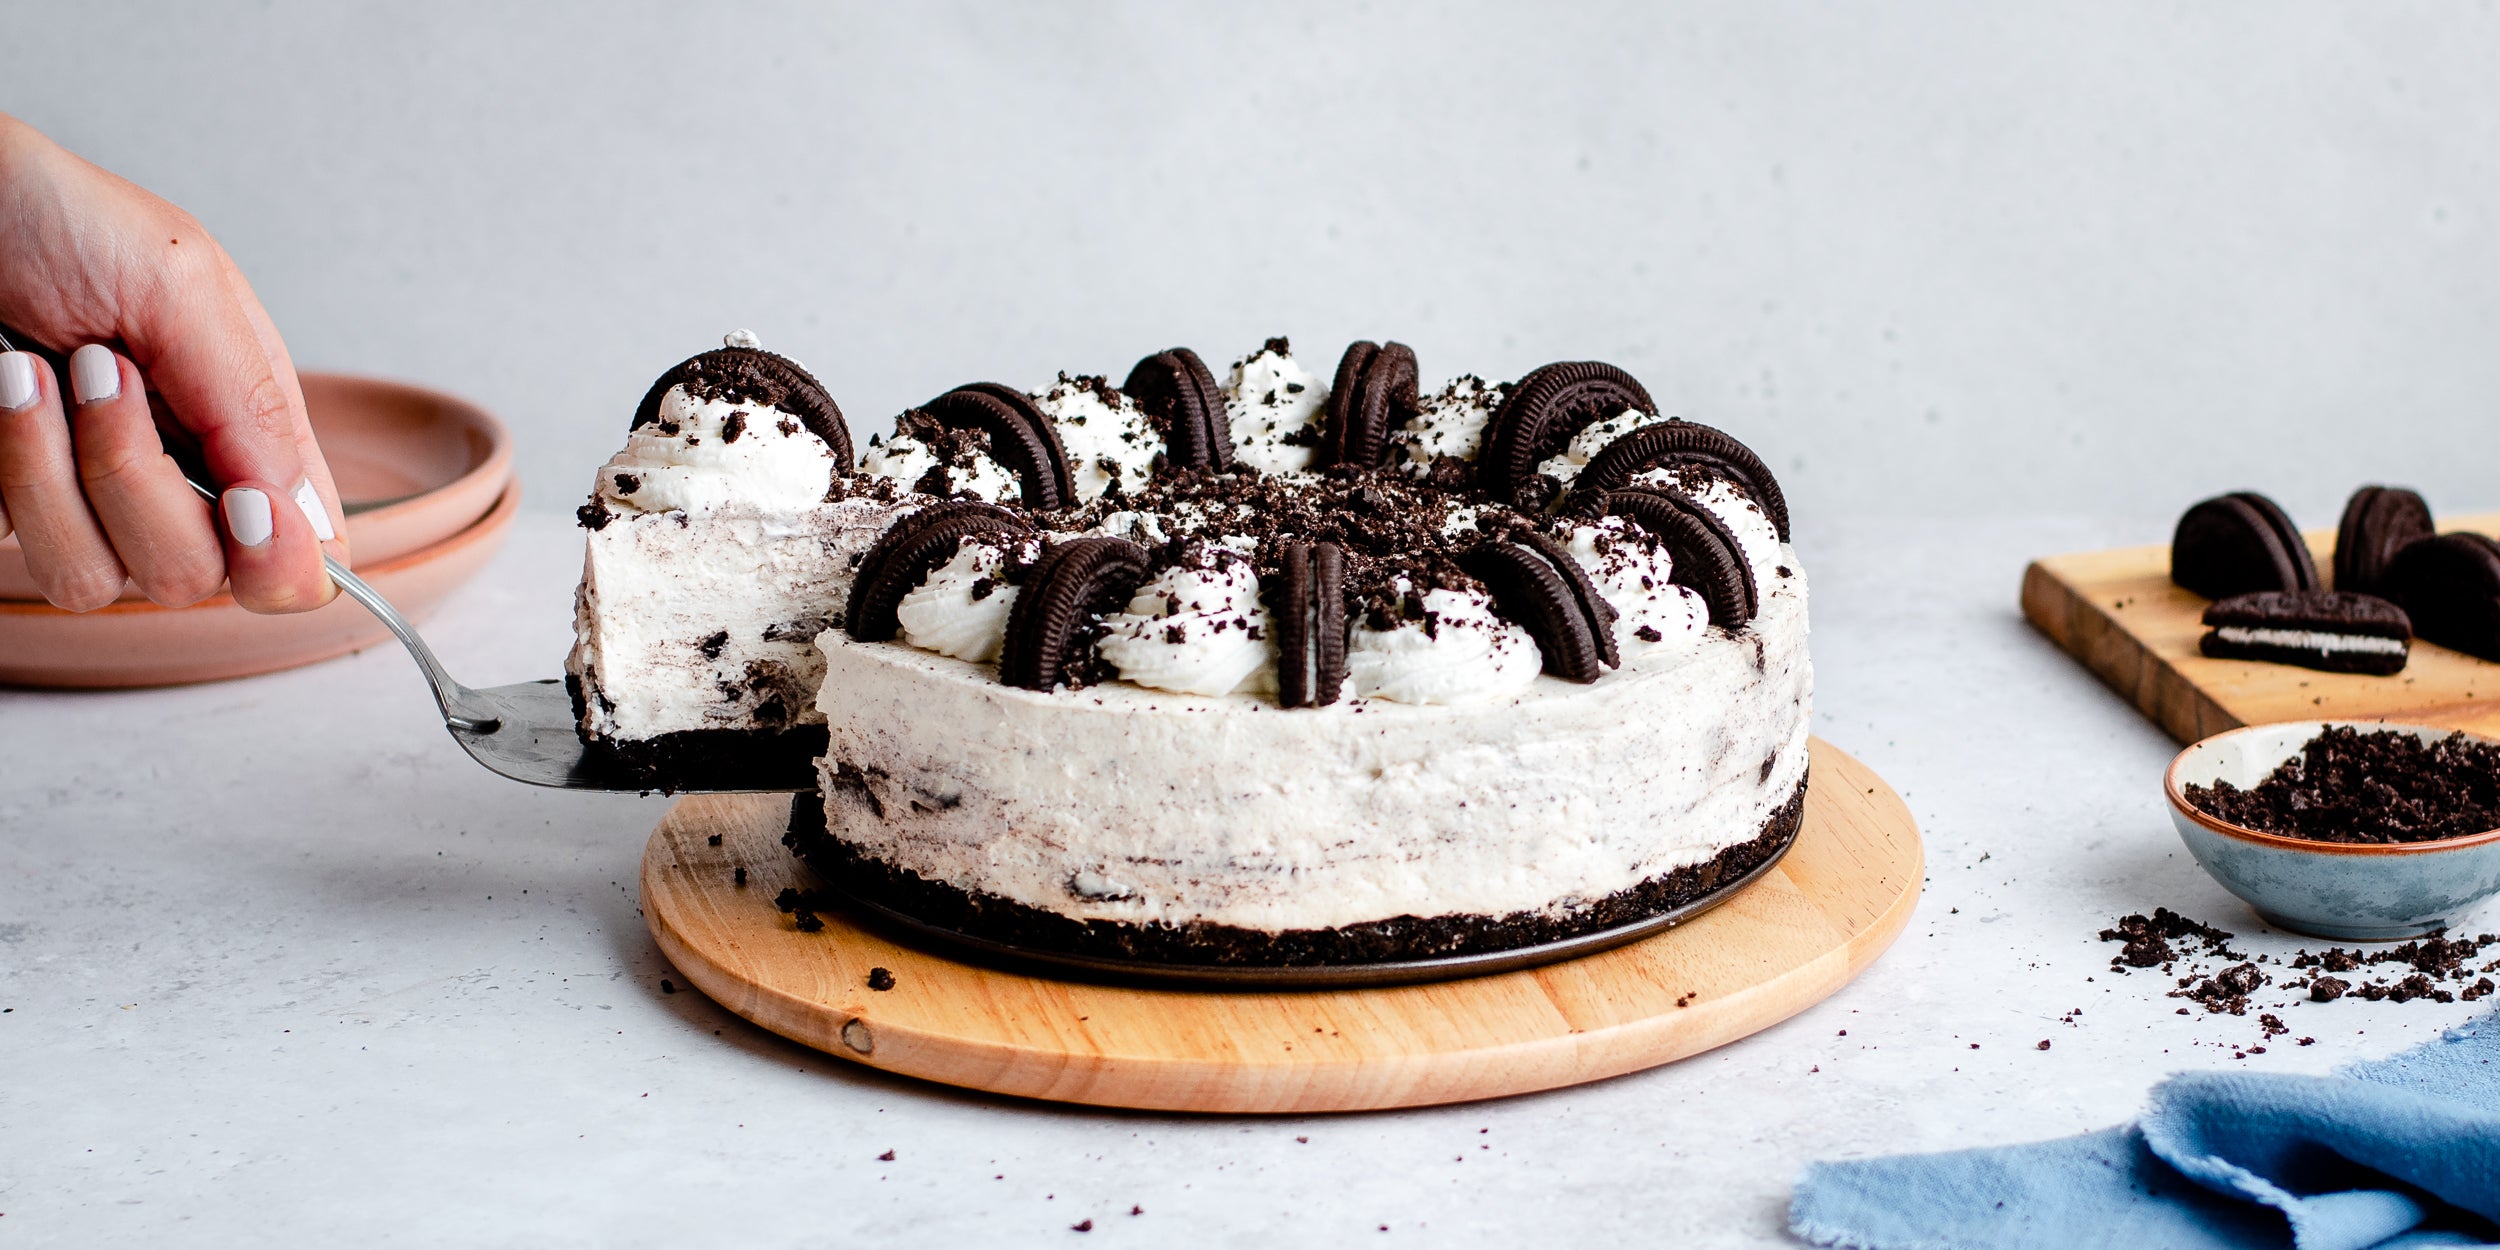 Slice being taken from no-bake Oreo cheesecake on a wooden plate